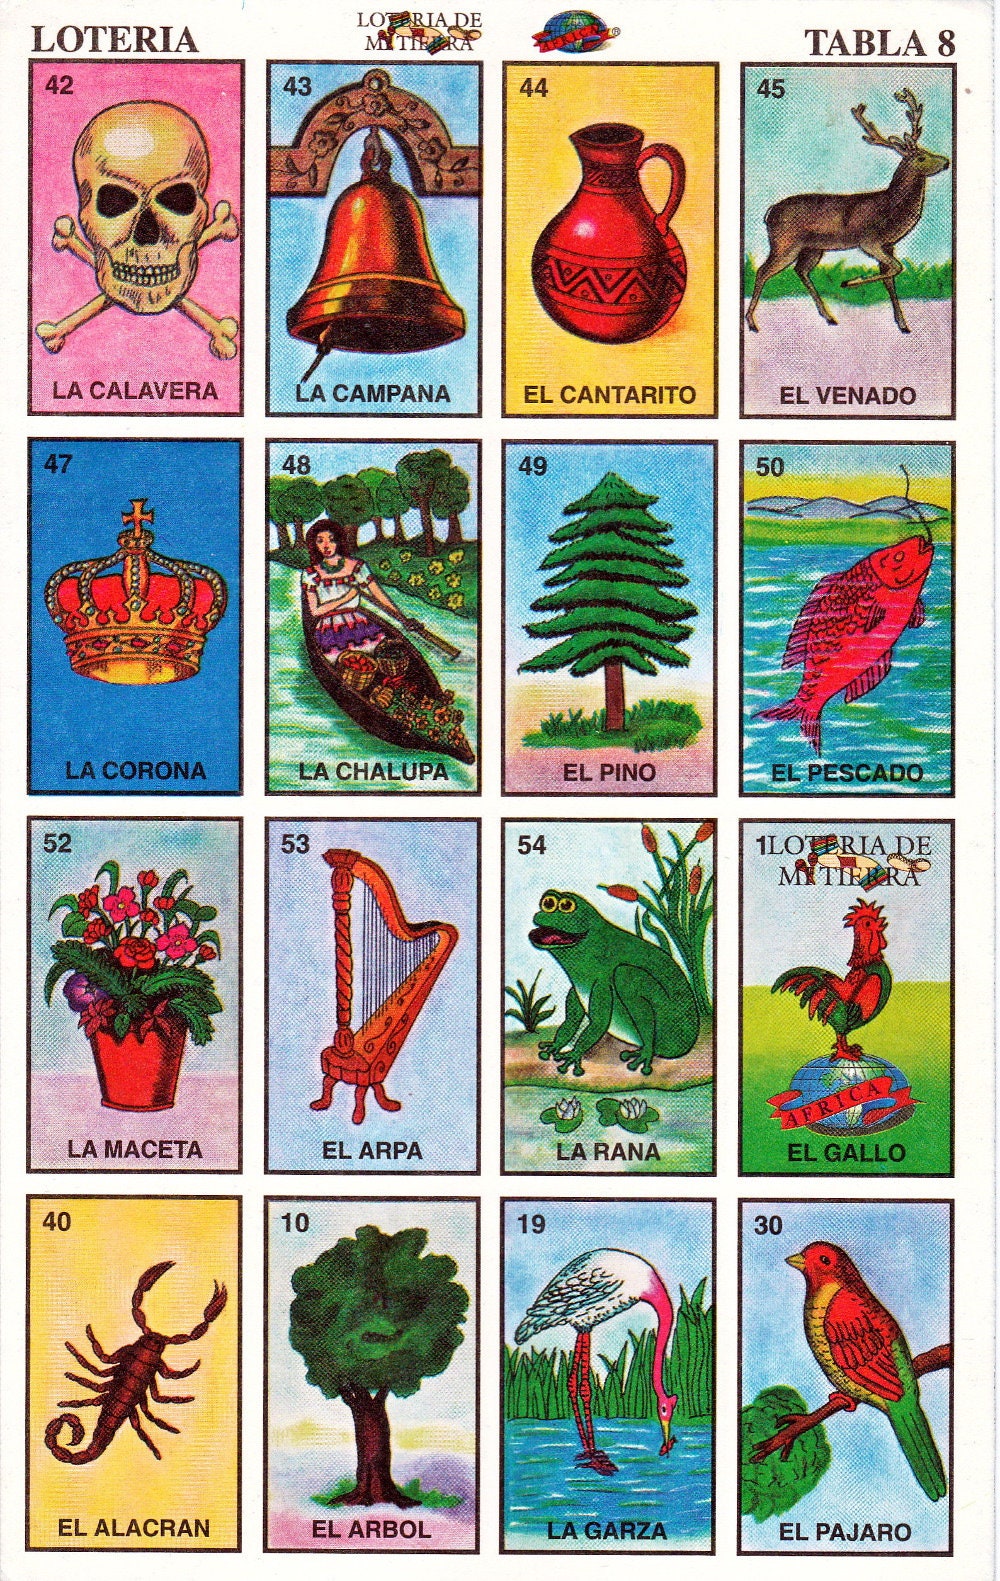 games-loteria-classic-mexican-lottery-10-boards-and-deck-loteria